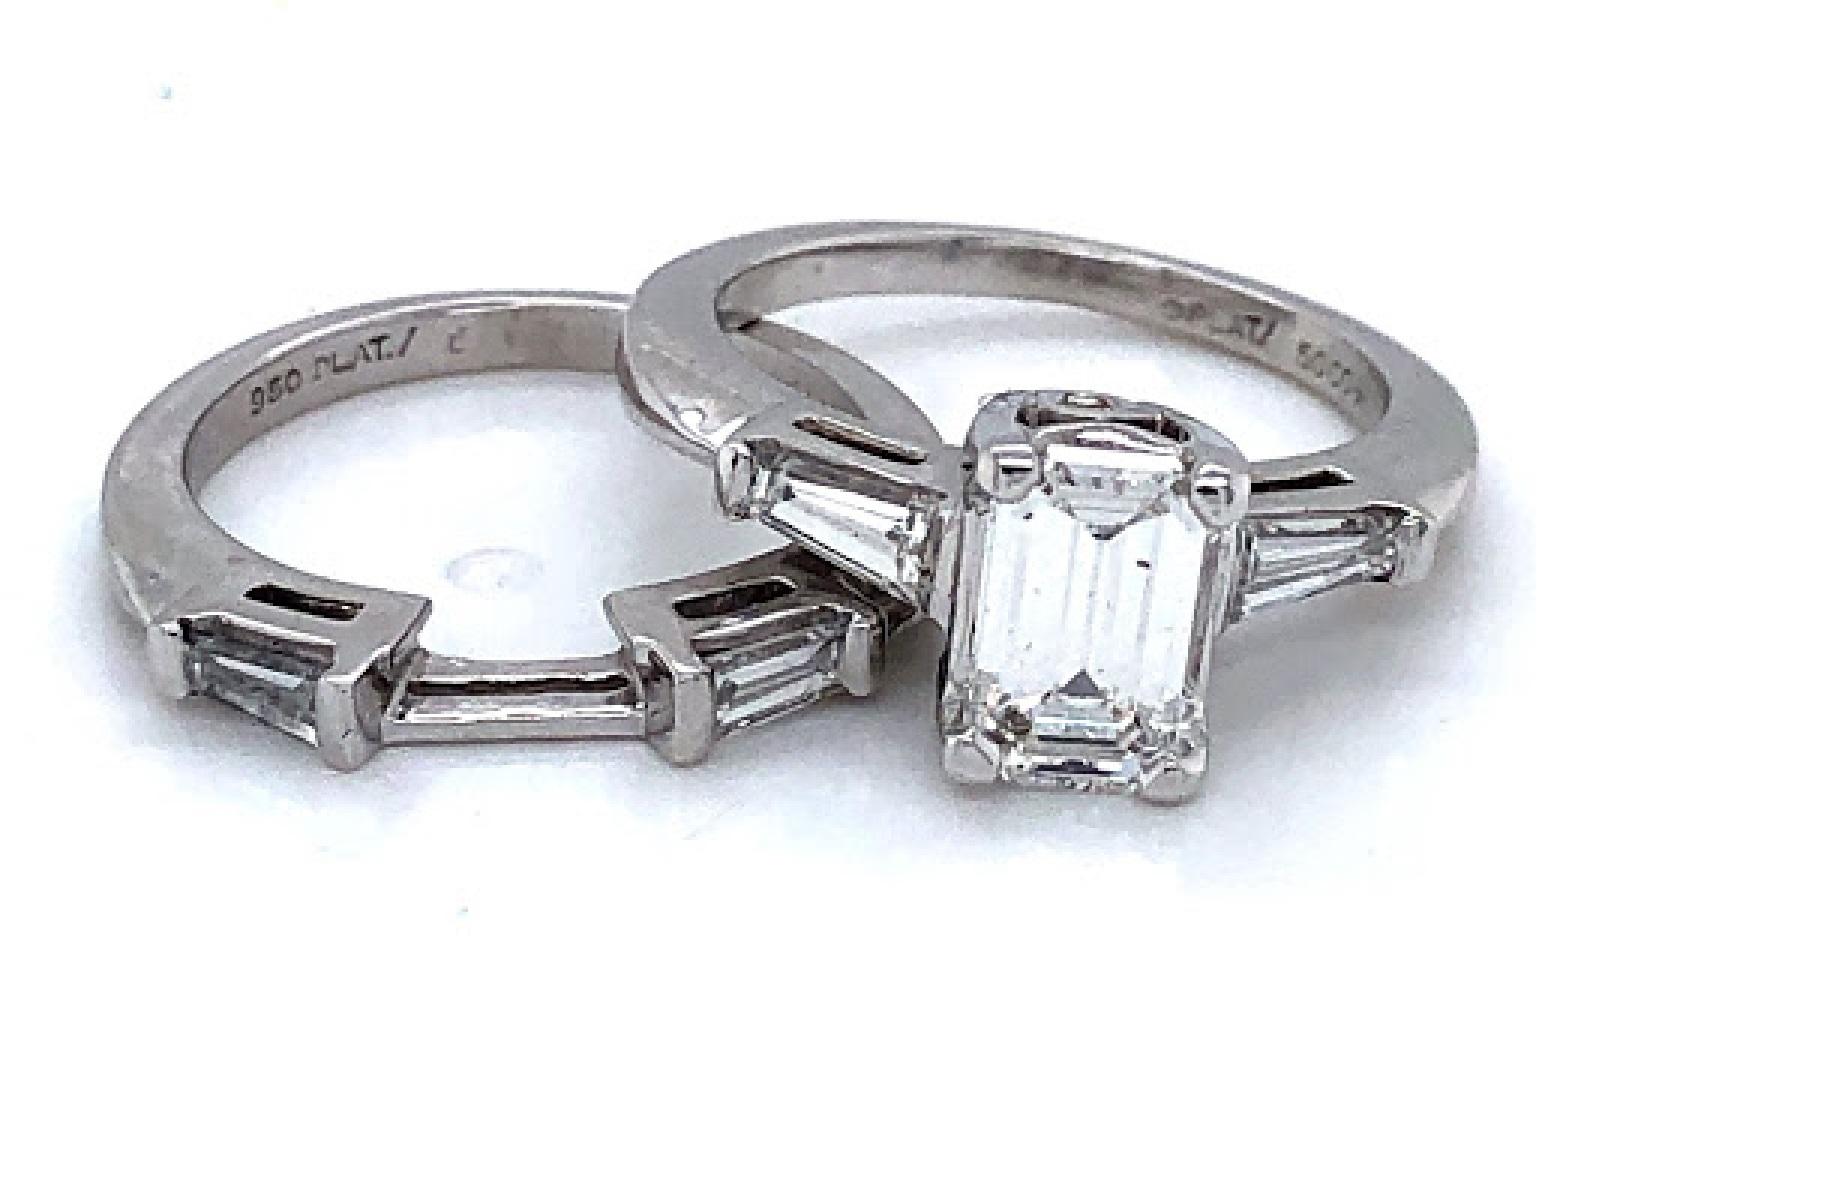 Platinum (stamped 0PLAT/5OCO*) three stone engagement ring, featuring a 7.26 mm by 4.51 mm emerald cut center stone. The Center stone weighs approximately 0.85 carat, is an H in color, a SI clarity, and is set into a four prong basket setting. On